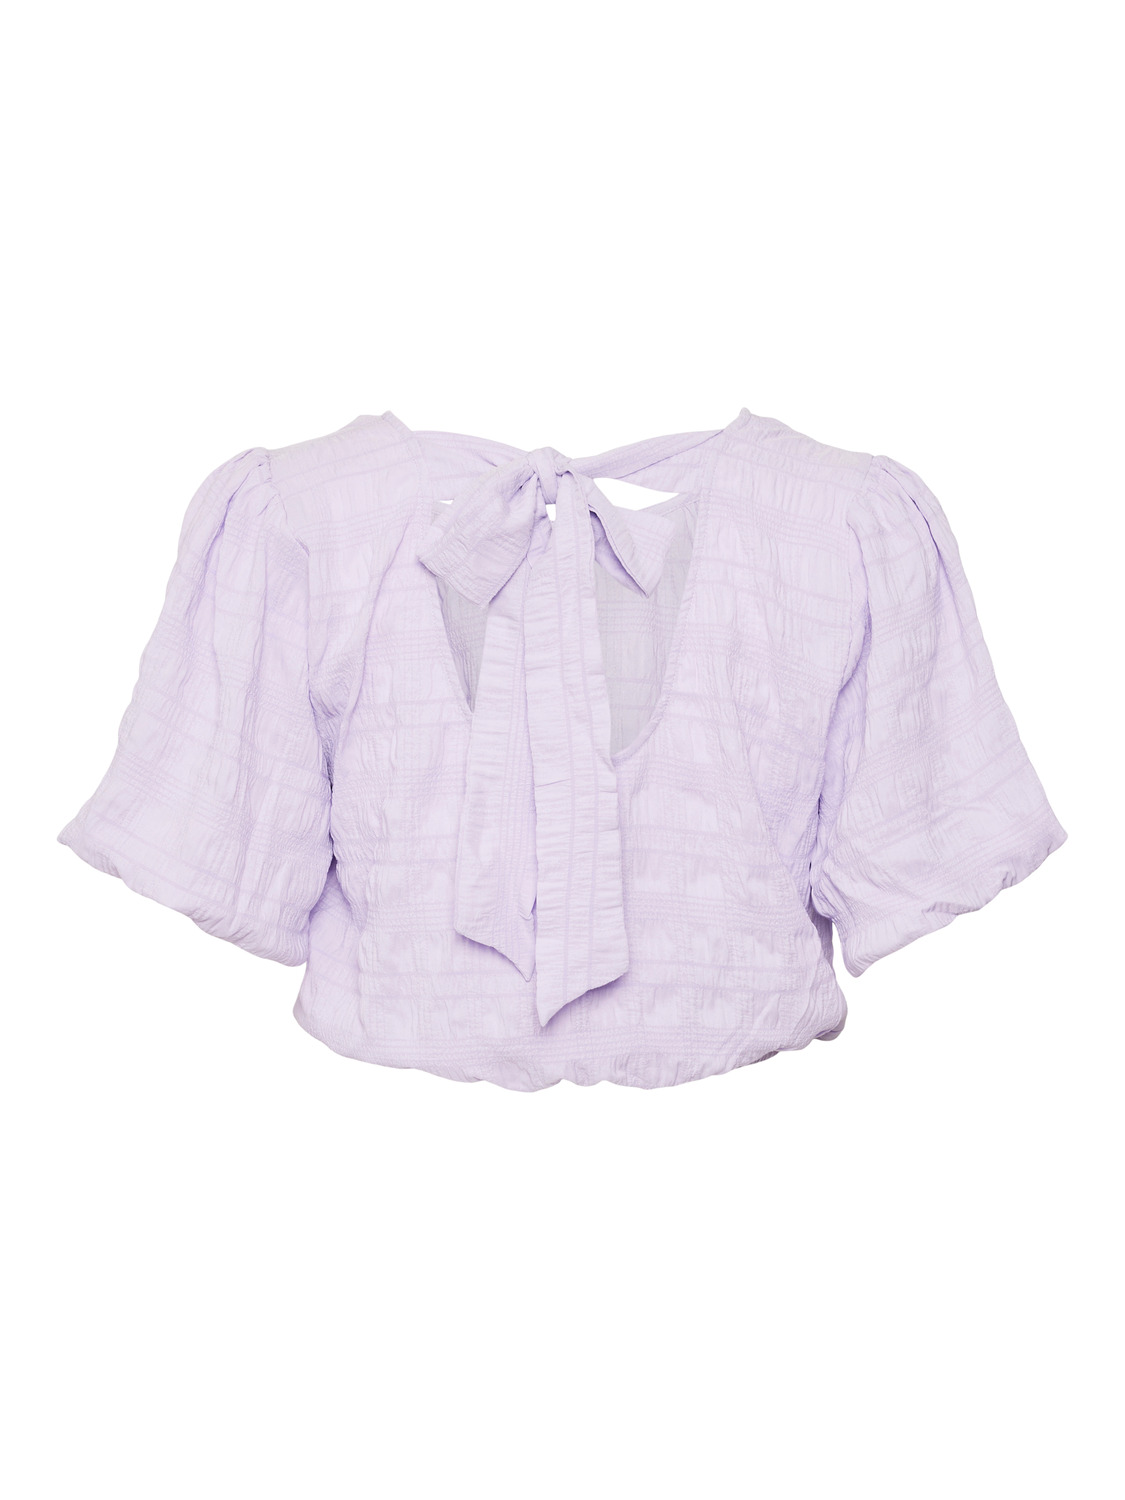 MAMA.LICIOUS Umstands-top  -Lavender Fog - 20018717